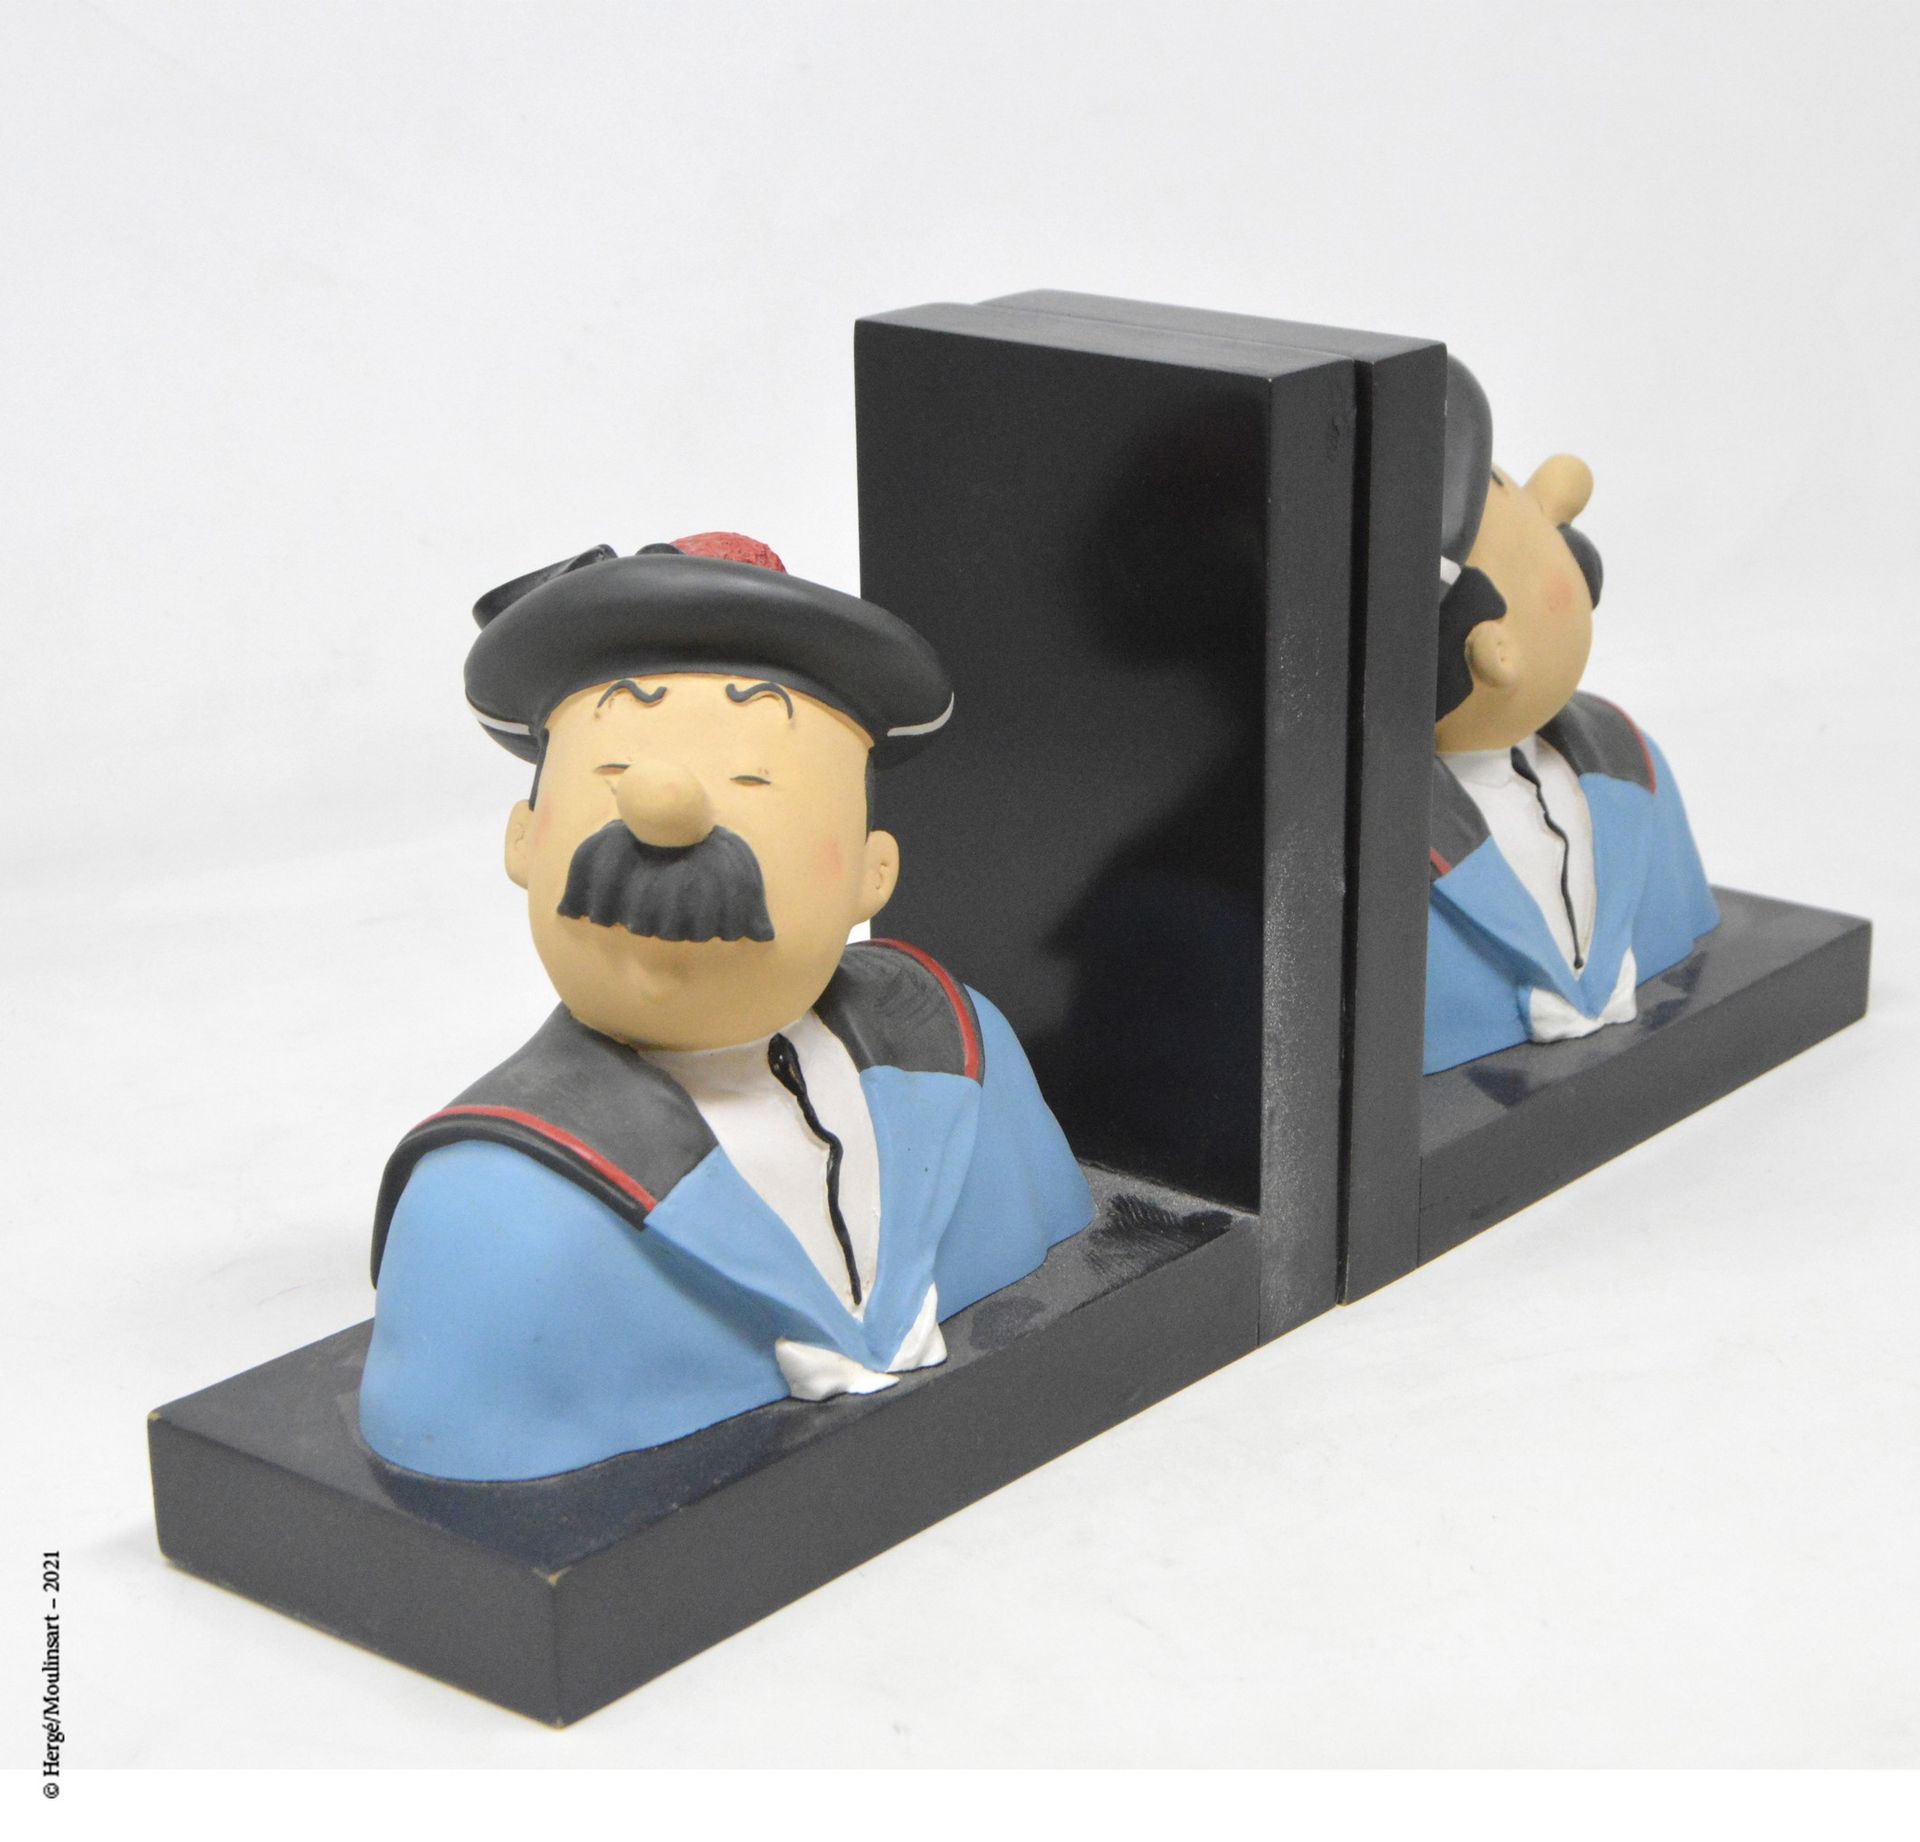 TINTIN HERGÉ/LEBLON DELIENNE

Pair of Dupond(t) bookends. 

Very good condition.&hellip;